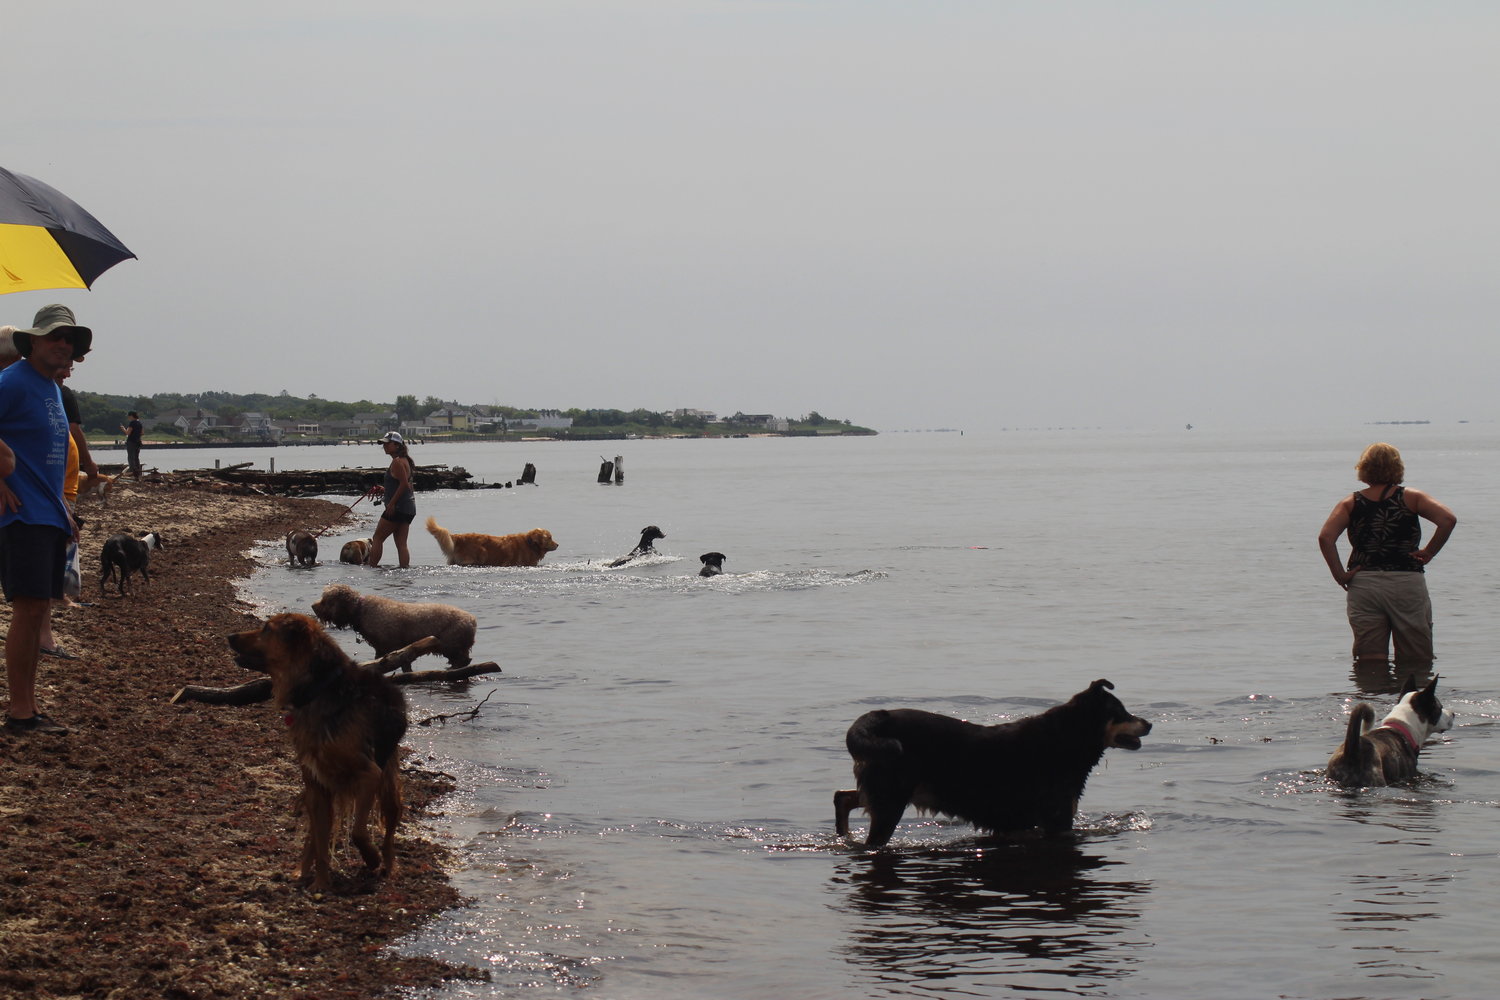 A Long Island dog advocacy group wants to get New York State to allow dogs on some of the 14,000 miles of shoreline.